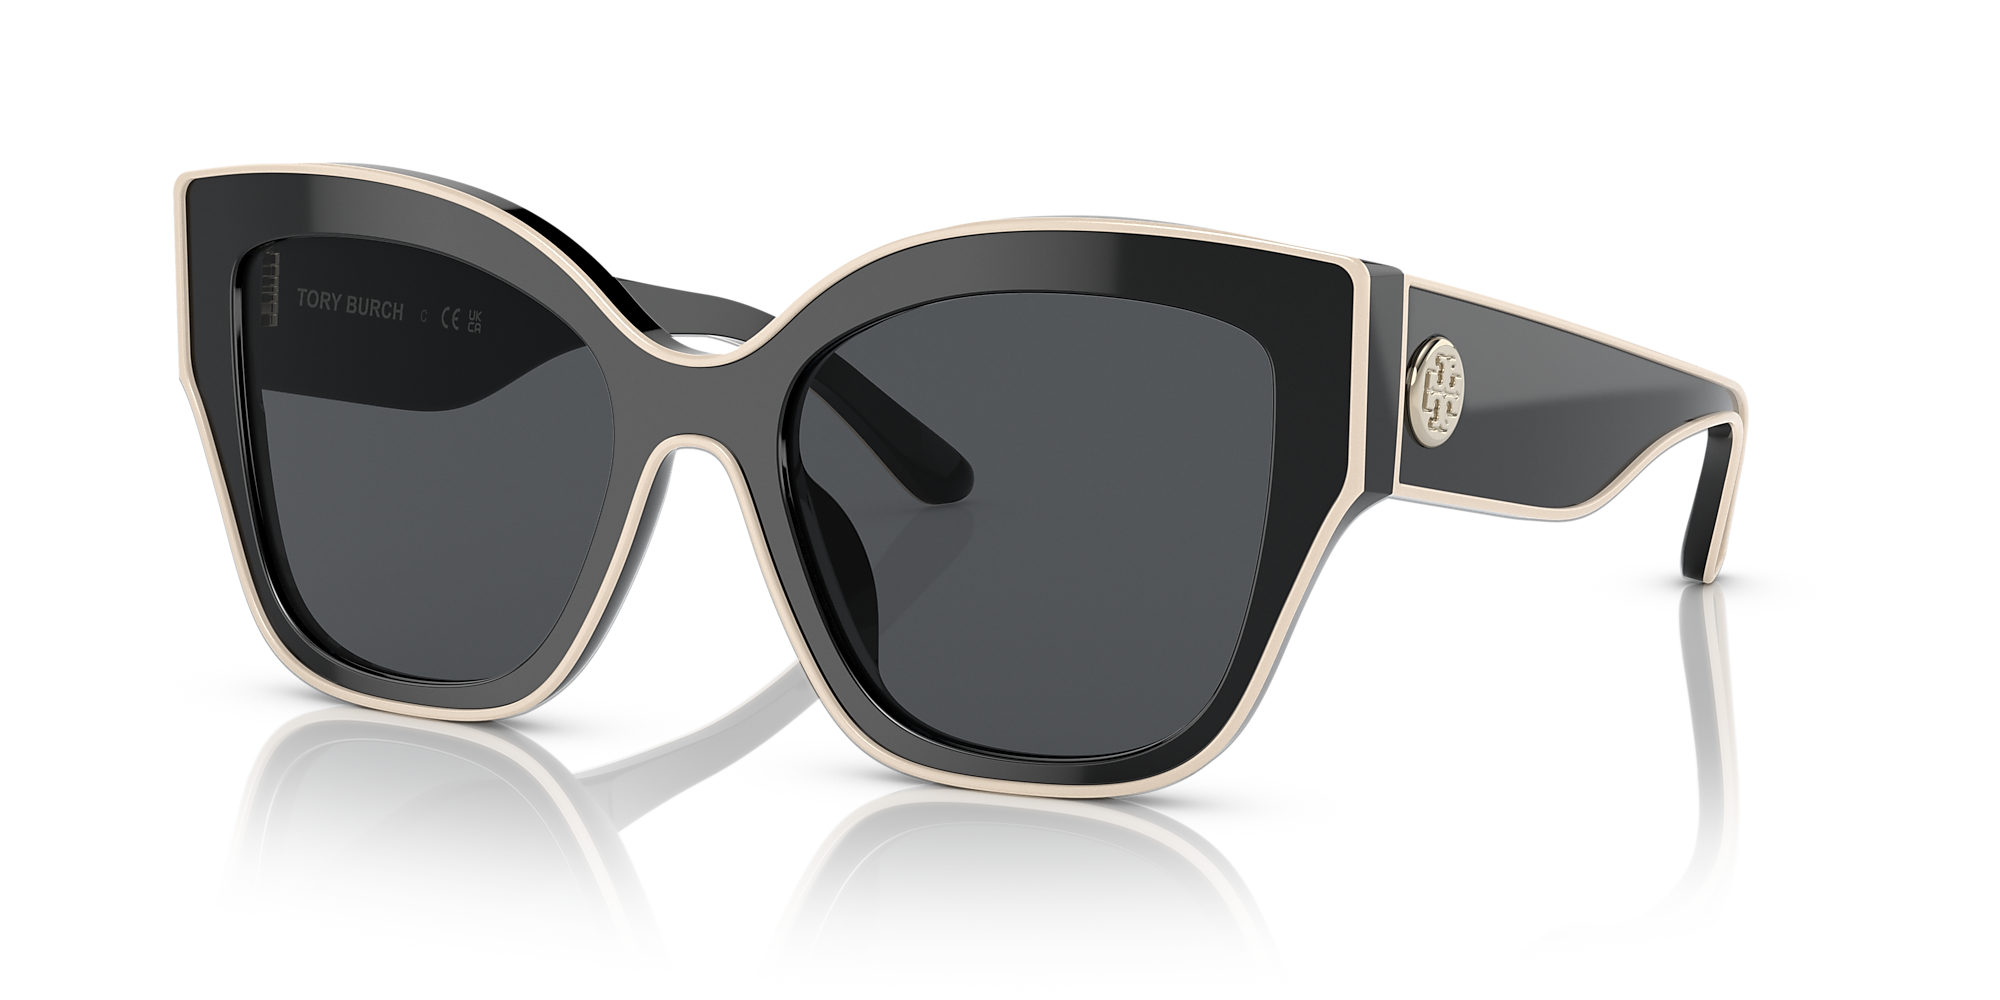 Tory Burch TY7184U 54 Solid Grey & Black With Ivory Piping Sunglasses ...